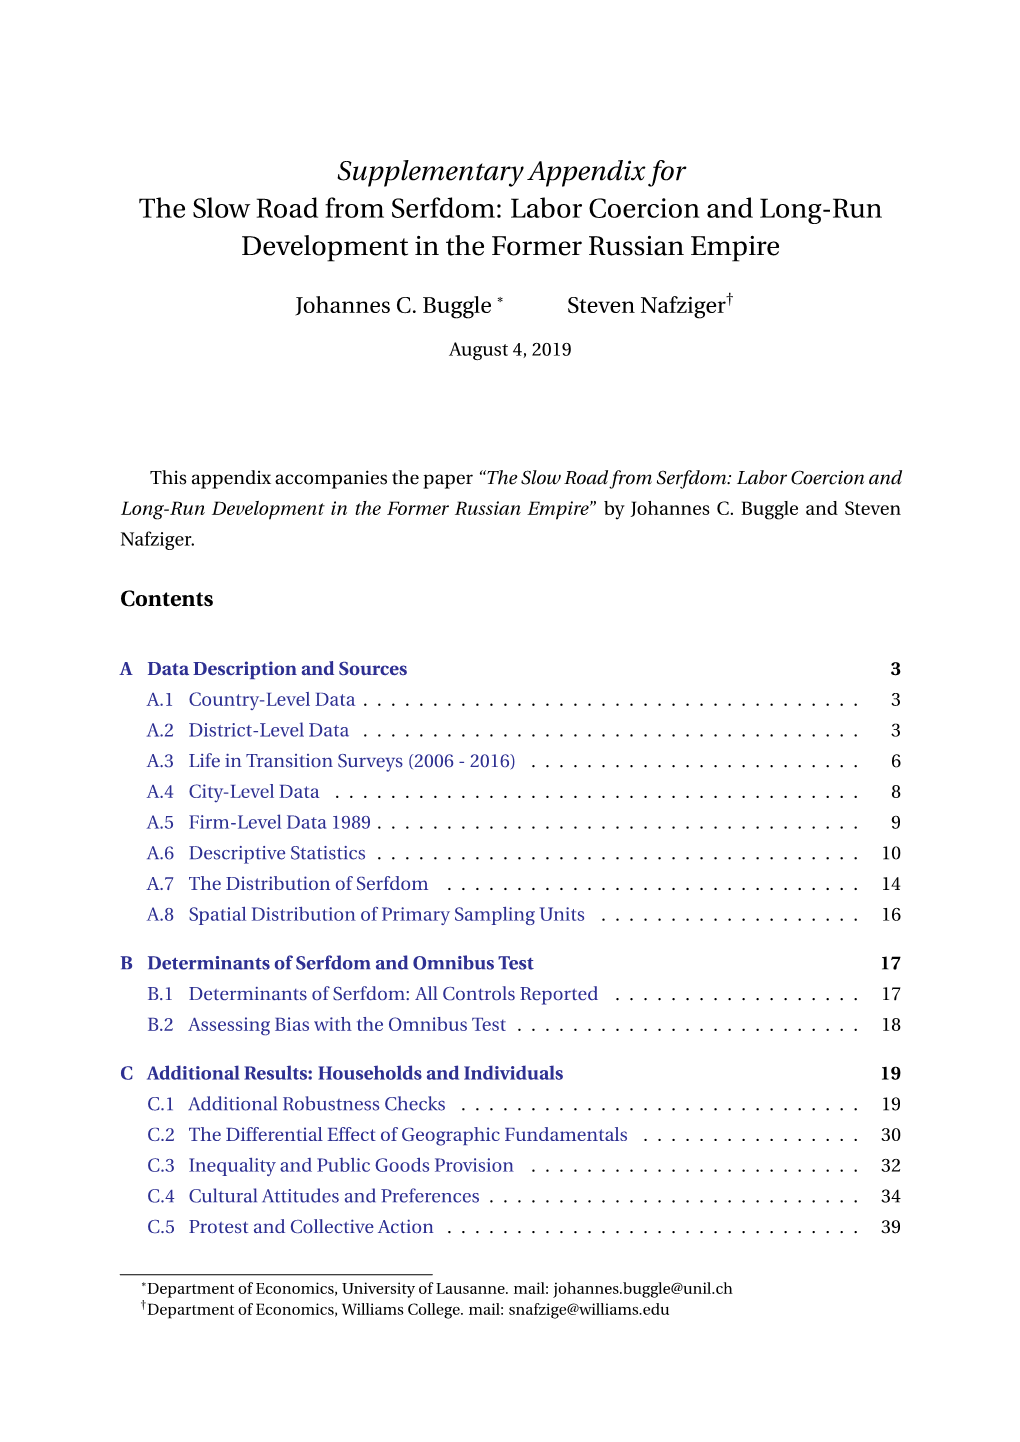 Supplementary Appendix for the Slow Road from Serfdom: Labor Coercion and Long-Run Development in the Former Russian Empire